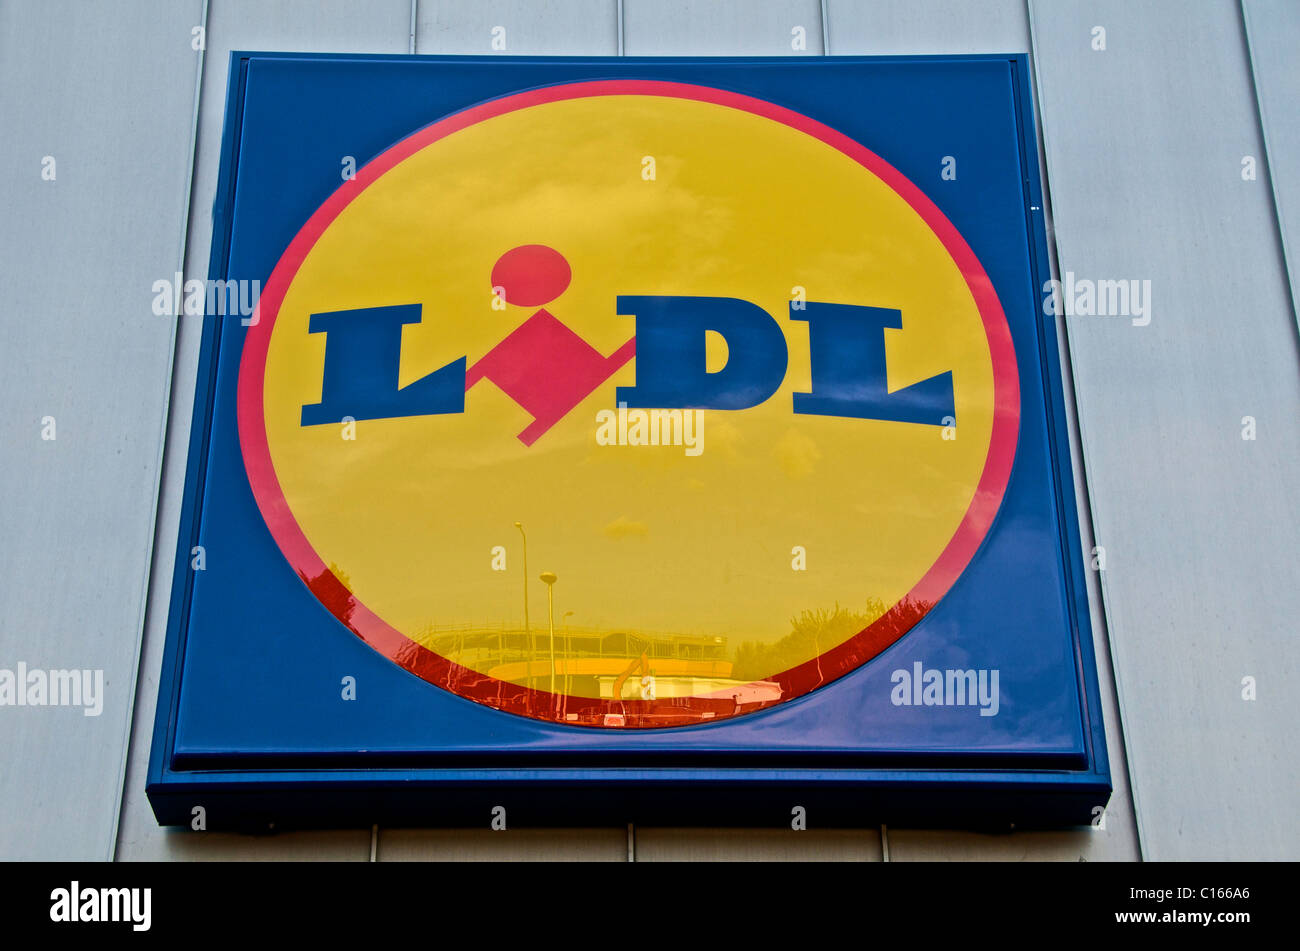 LIDL Supermarket check out logo Stock Photo